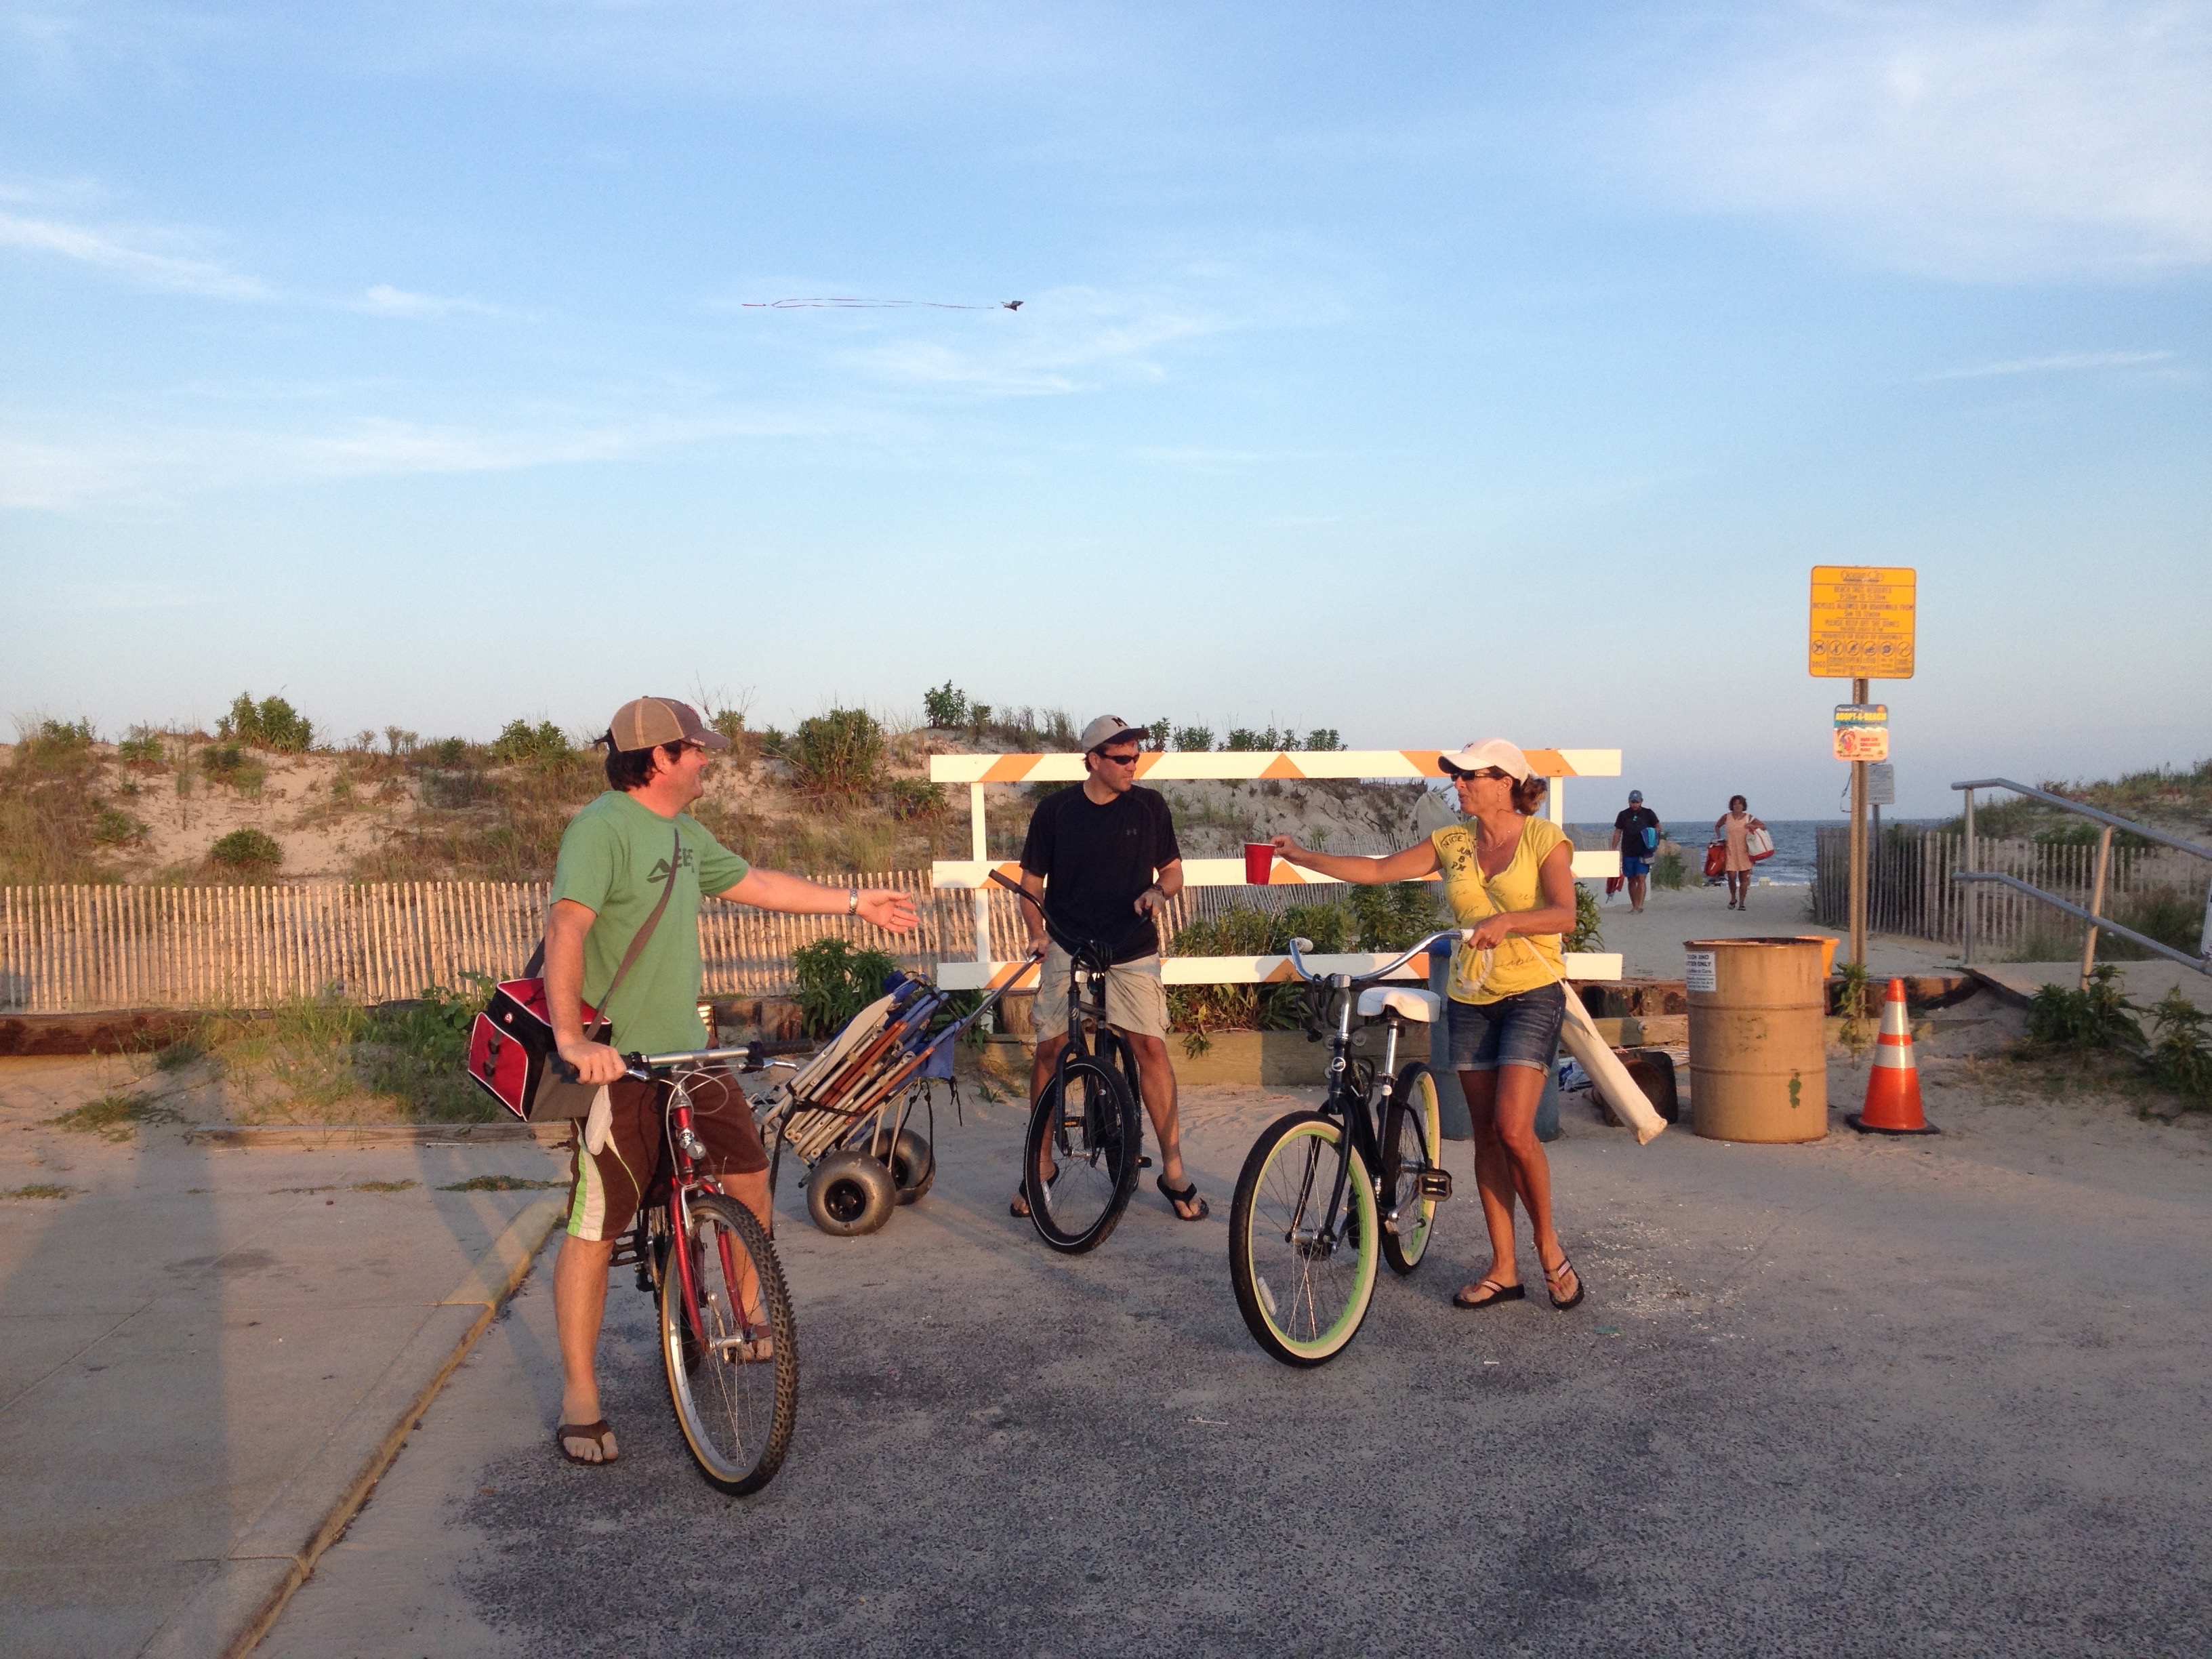 Wheeling and Wandering: Travel with Bikes